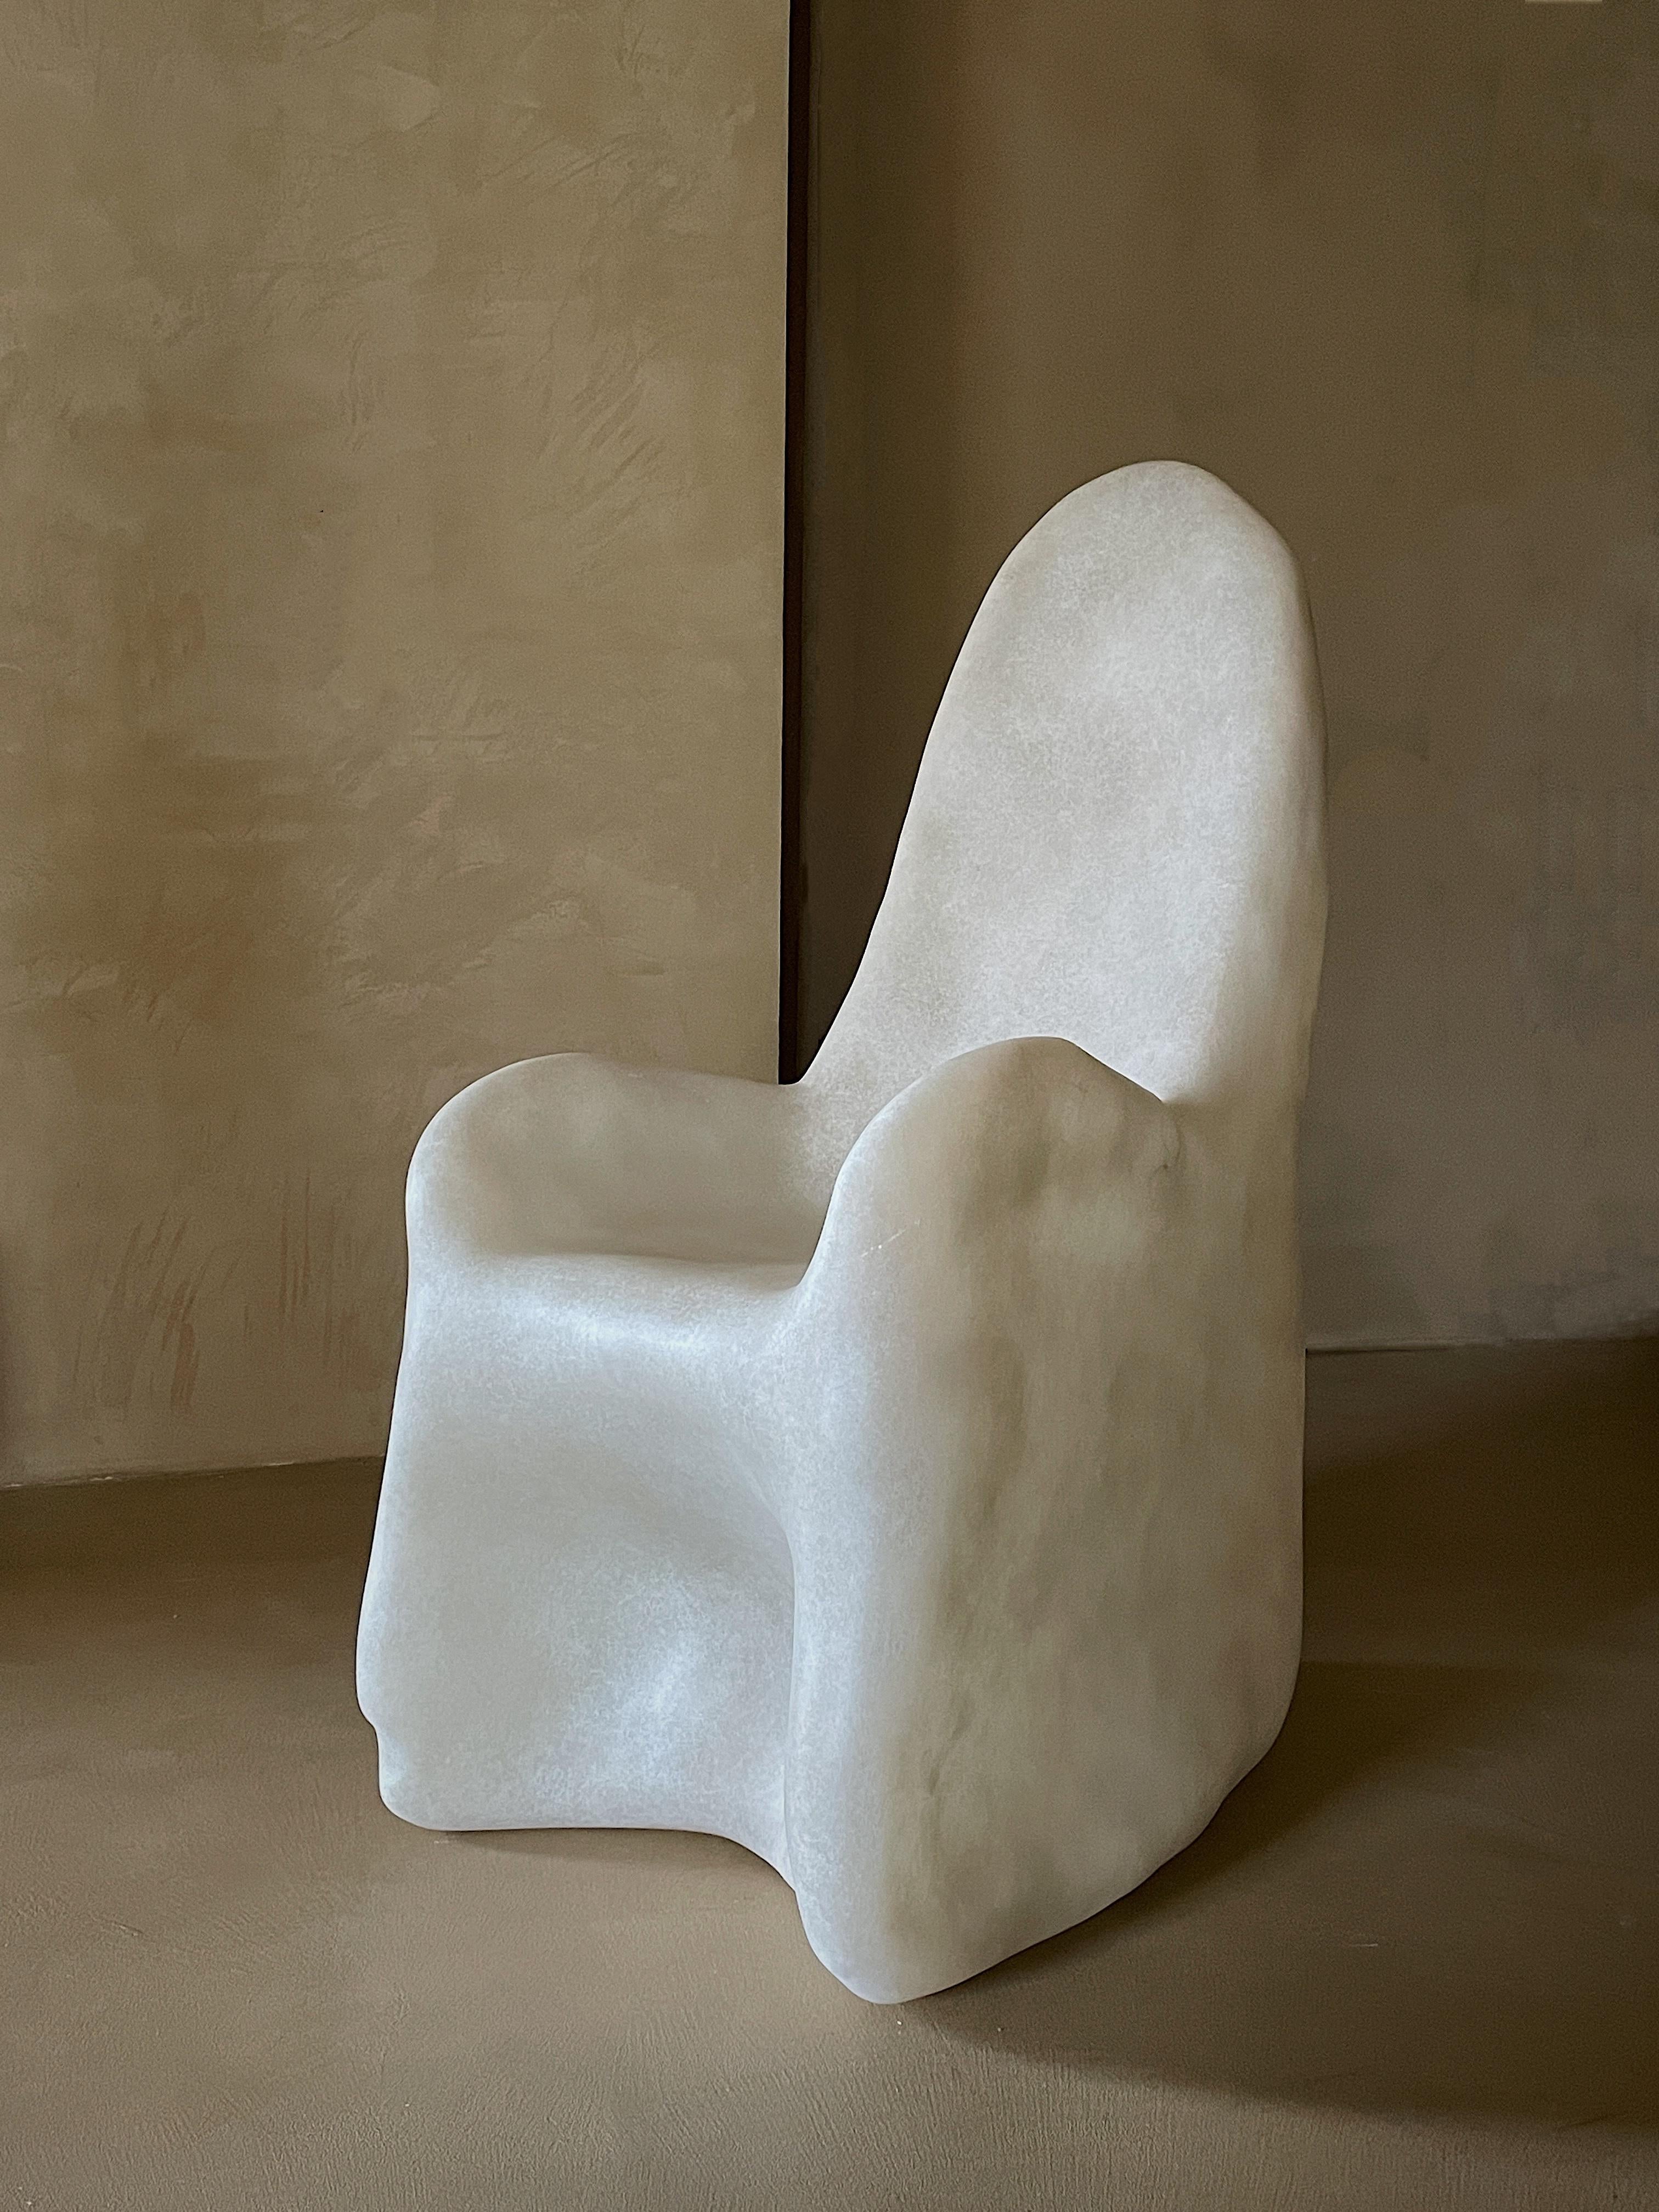 Knead armchair by kar
Dimensions: W 75 x D 55 x H 110 cm
Materials: FRP
Available in black

Kar, is the root of Sanskrit Karma, meaning karmic repetition. We seek the cause and effect in aesthetics, inspired from the past, the present, and the